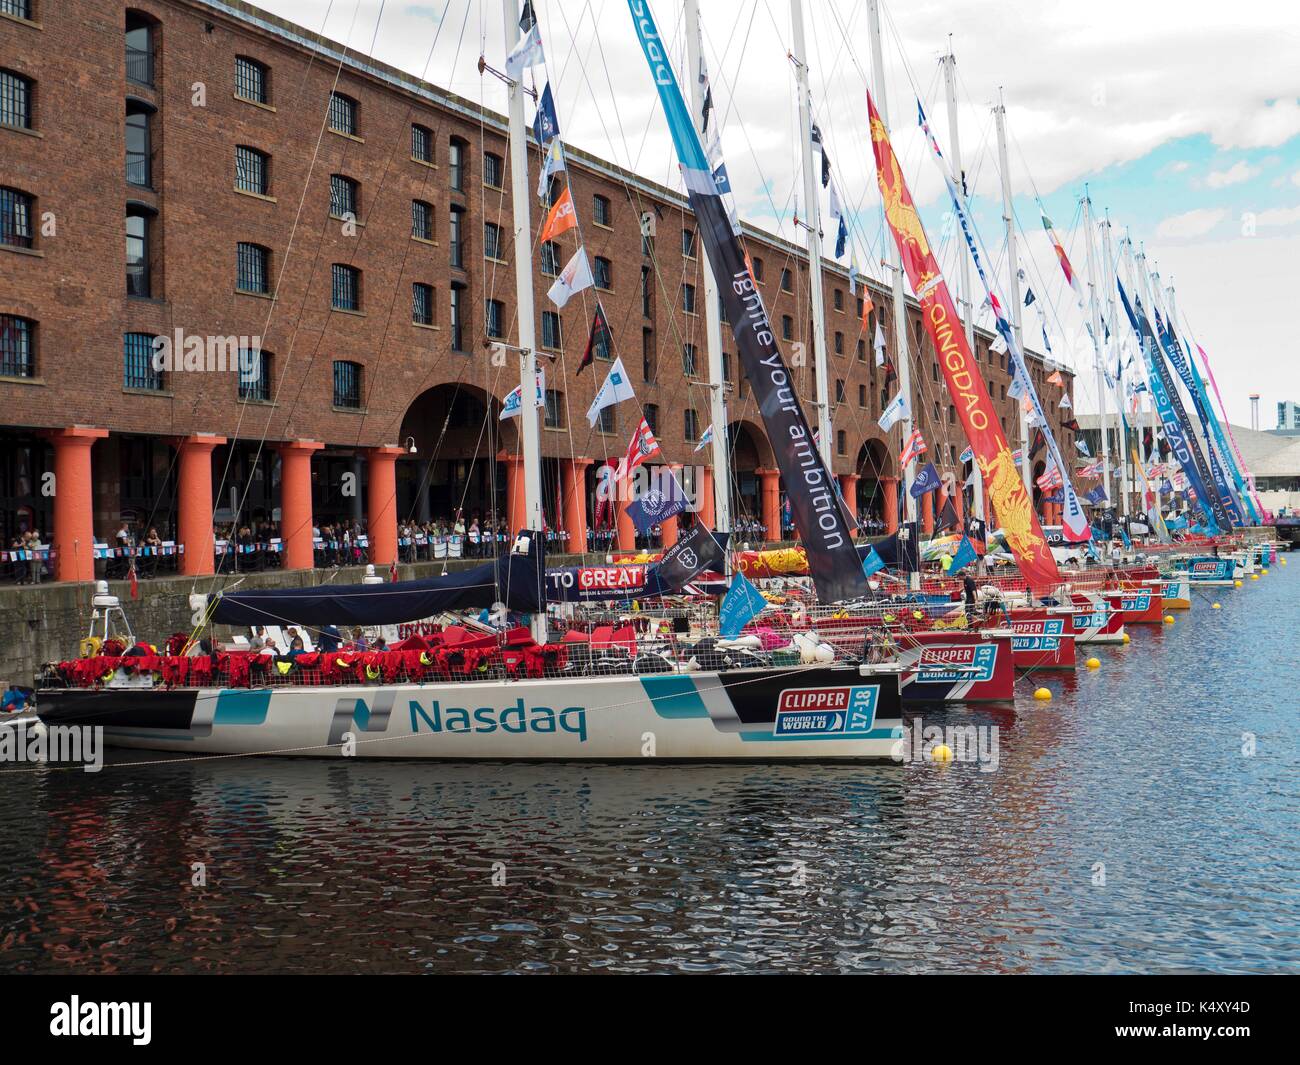 Yachts competing in the 2017 Clipper Race before the start at Albert Dock, Liverpool. The Nasdaq sponsored yacht is in the foreground. Stock Photo